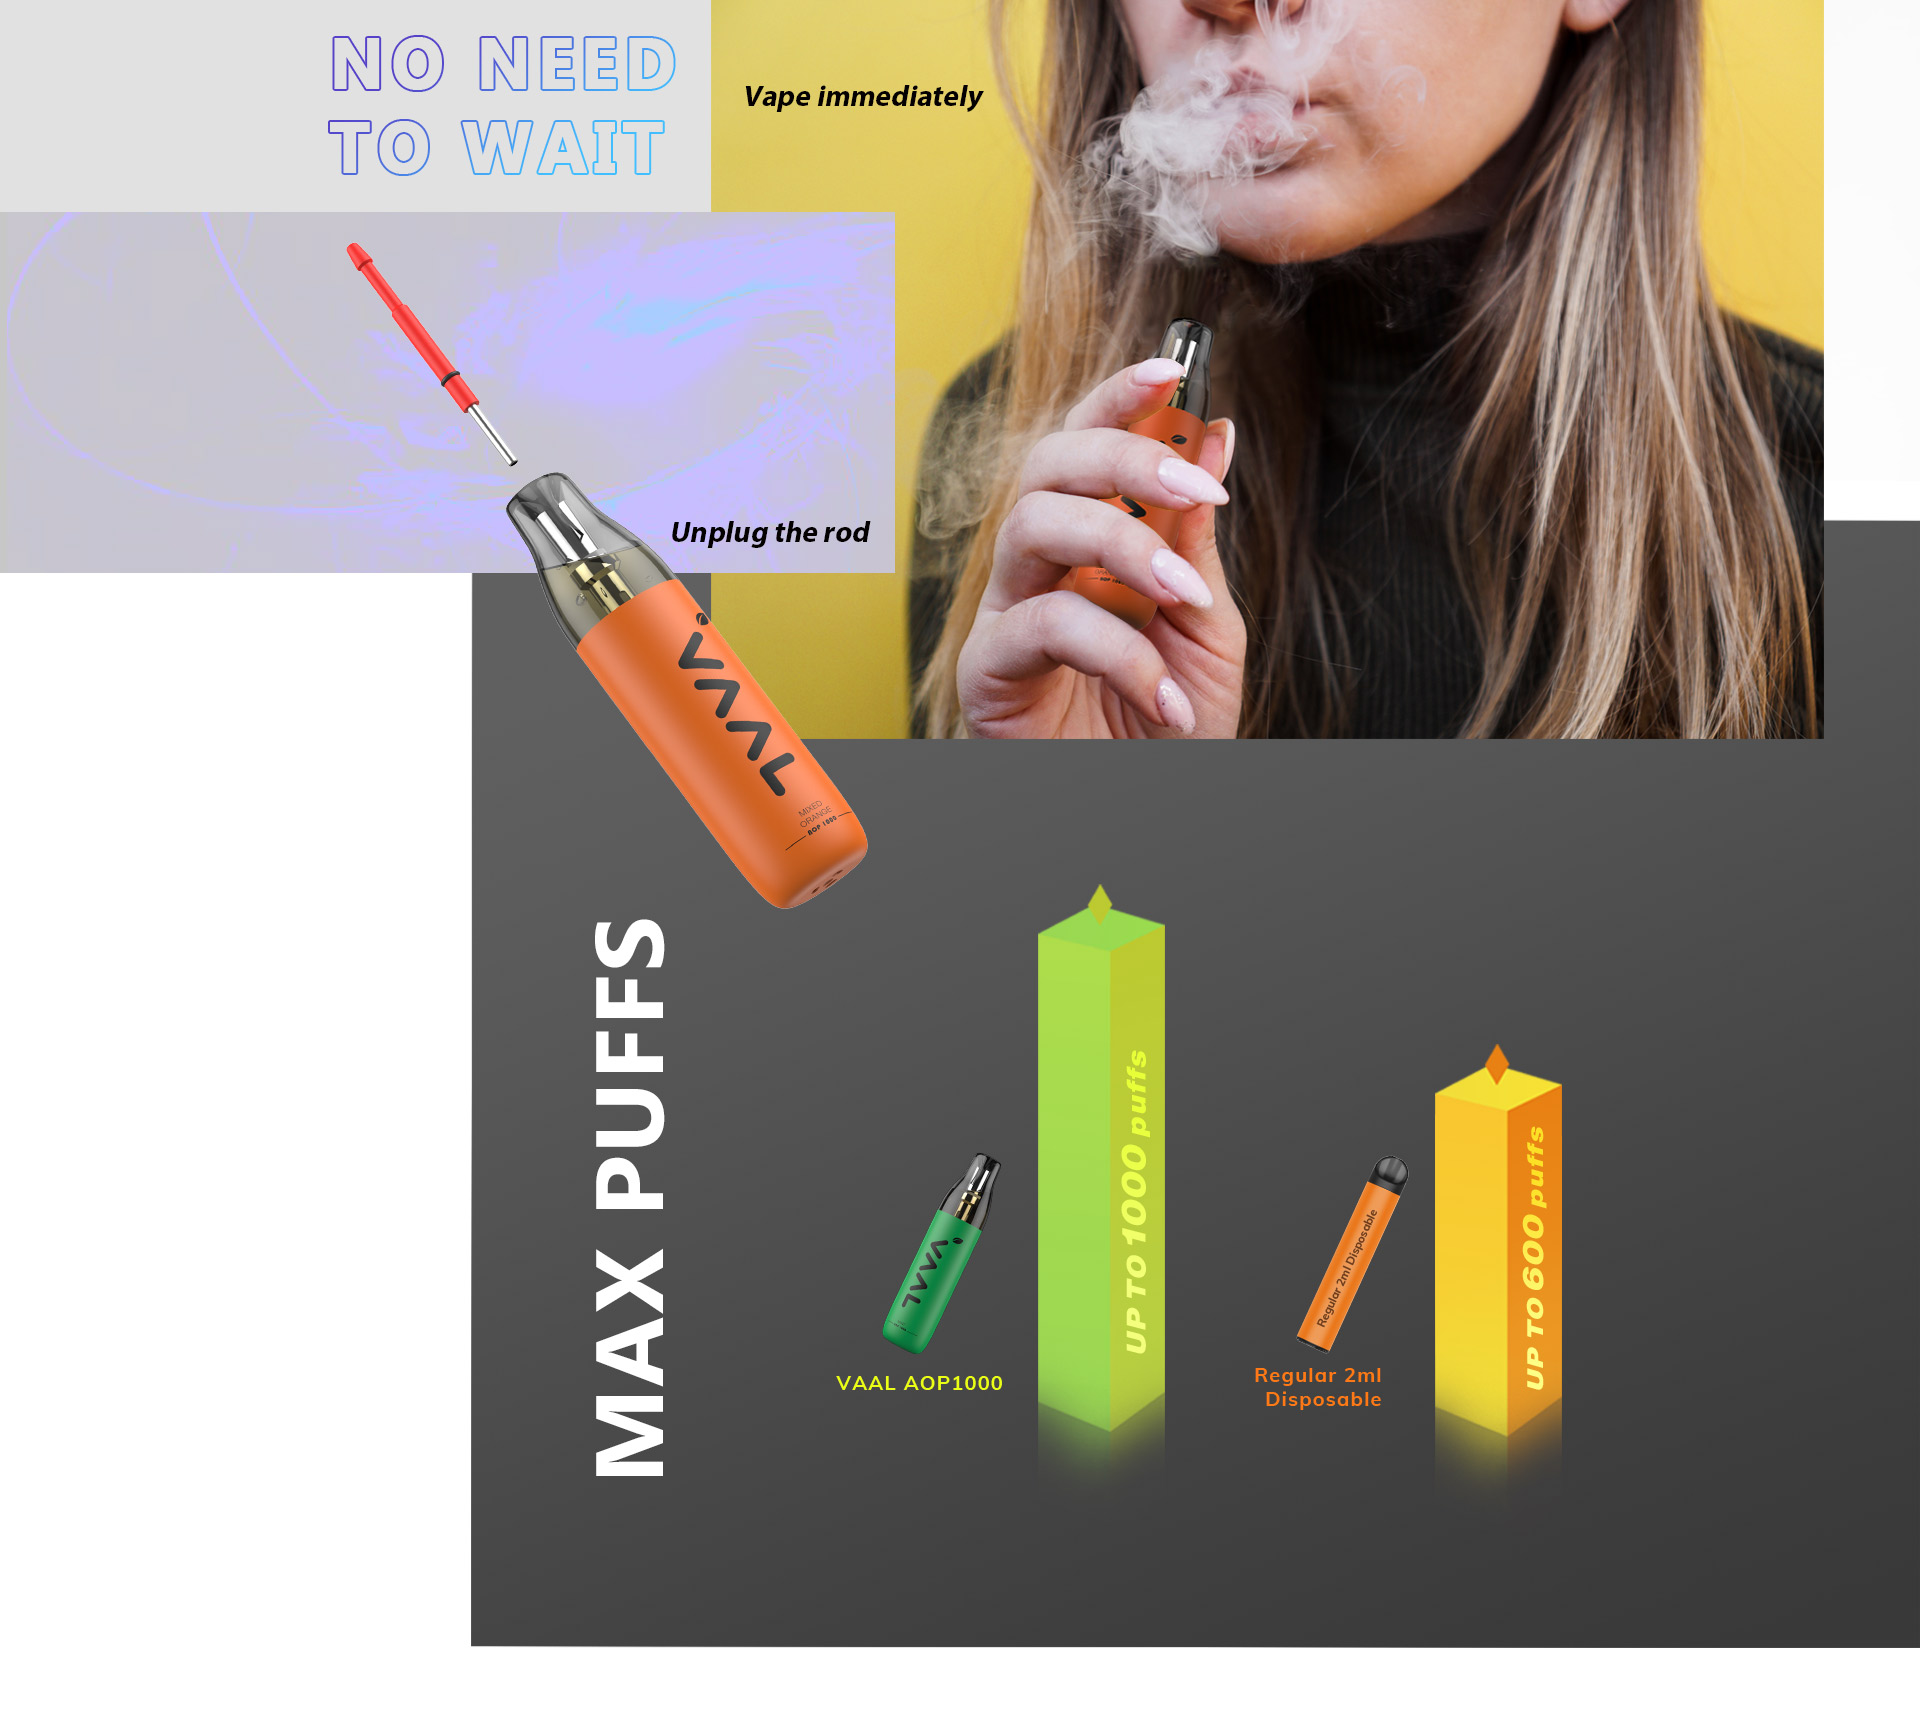 The AOP tech features a silica gel rod which can prevent contact between air and oil. The rod can be easily pulled out before use, you can vape immediately, and it will not impact your vaping experience. Vaal AOP1000 could provide you pretty high utilization rate with its 2ml e-juice and approximate 1000 puffs of tasteful vaping experience.